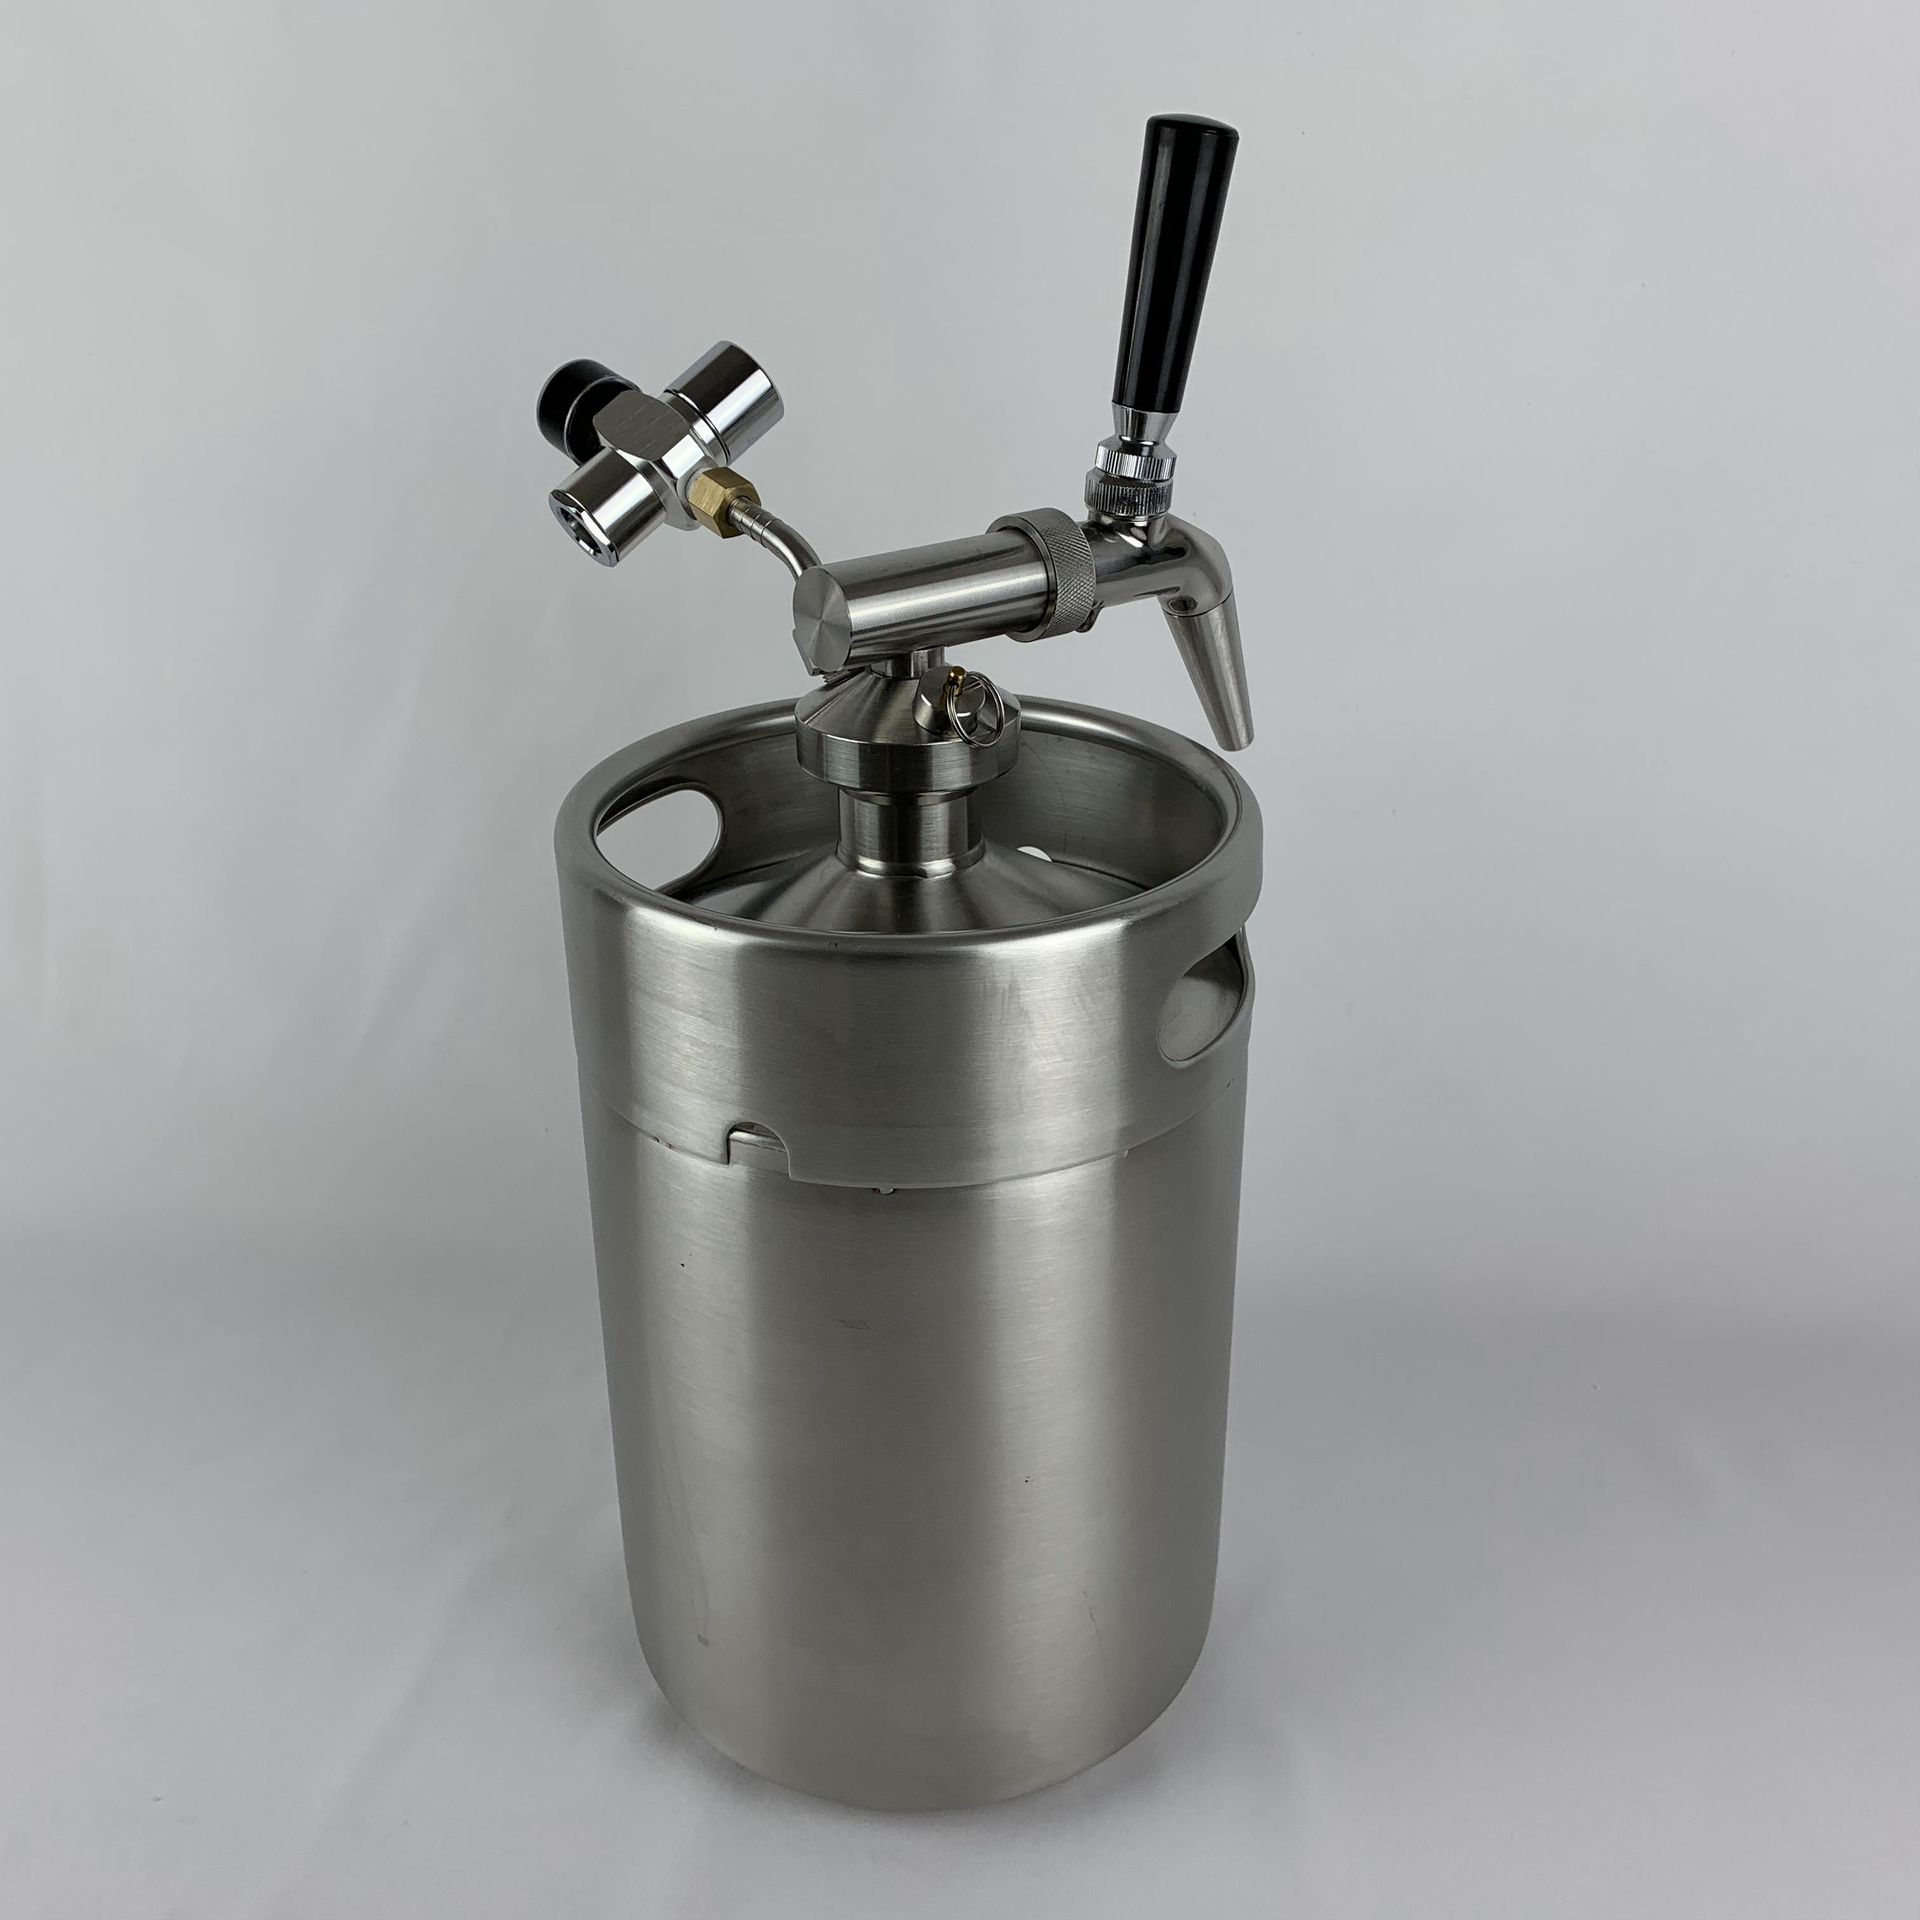 product-Trano-custom mini beer brewery keg with craft beer dispenser tap system tap uk uses-img-1